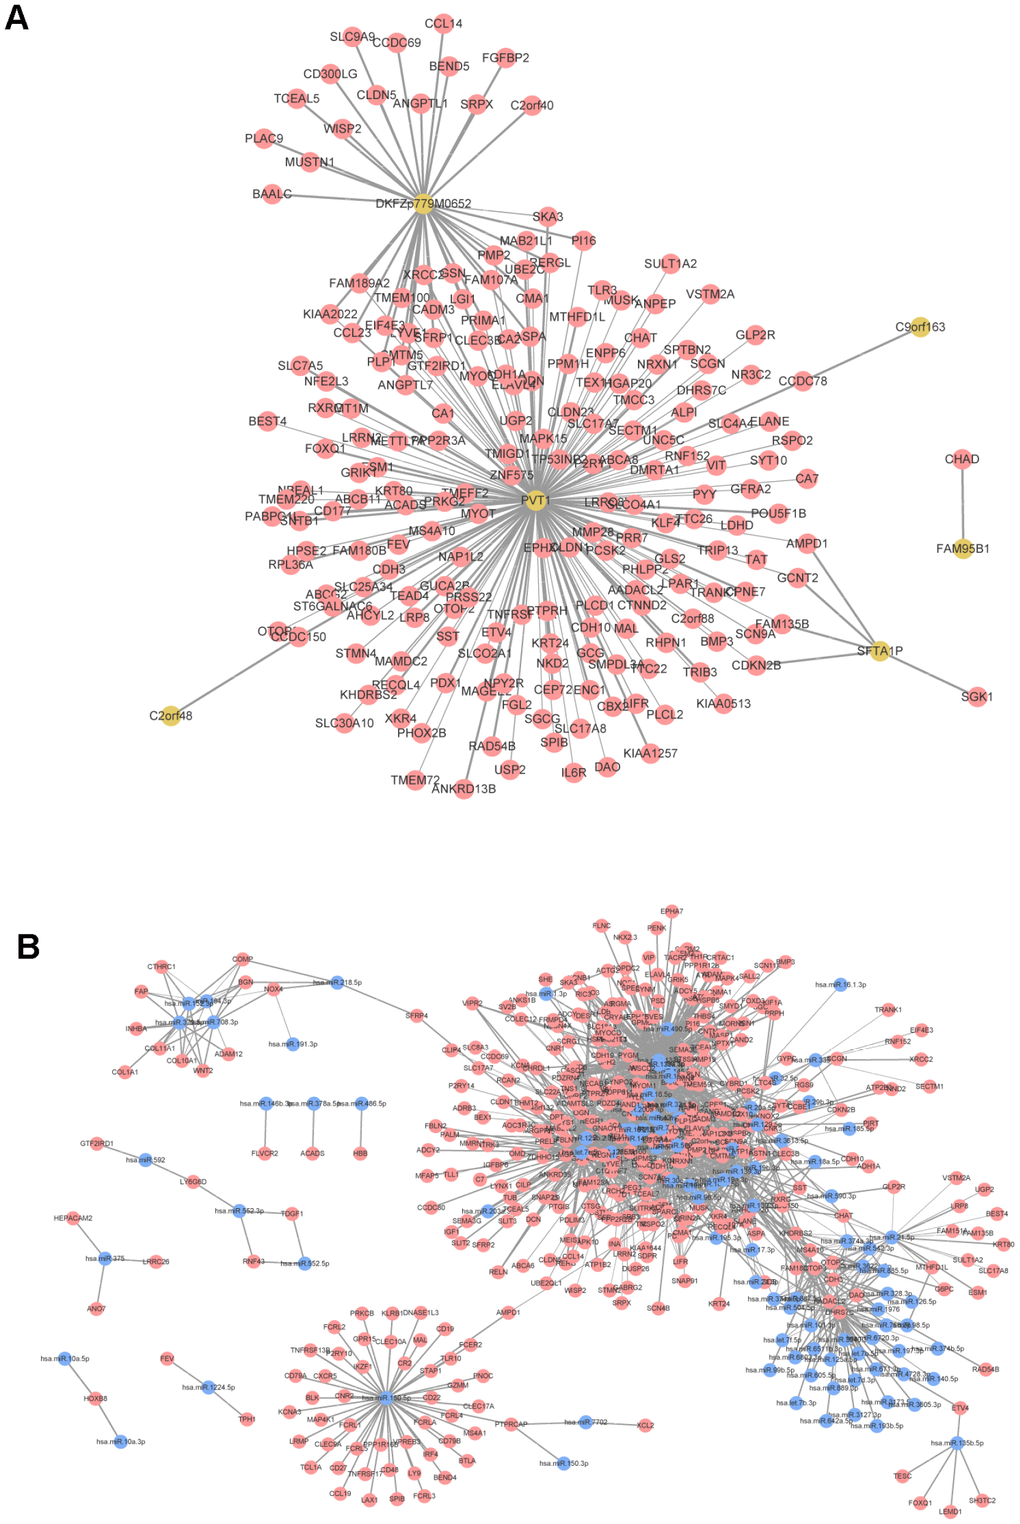 Co-expression network analysis. (A) mRNA-lncRNA co-expression network. (B) mRNA-miRNA co-expression network. Red node was mRNA, yellow node was lncRNA, and blue node was miRNA. The line thickness indicates the relative size of correlation coefficient.